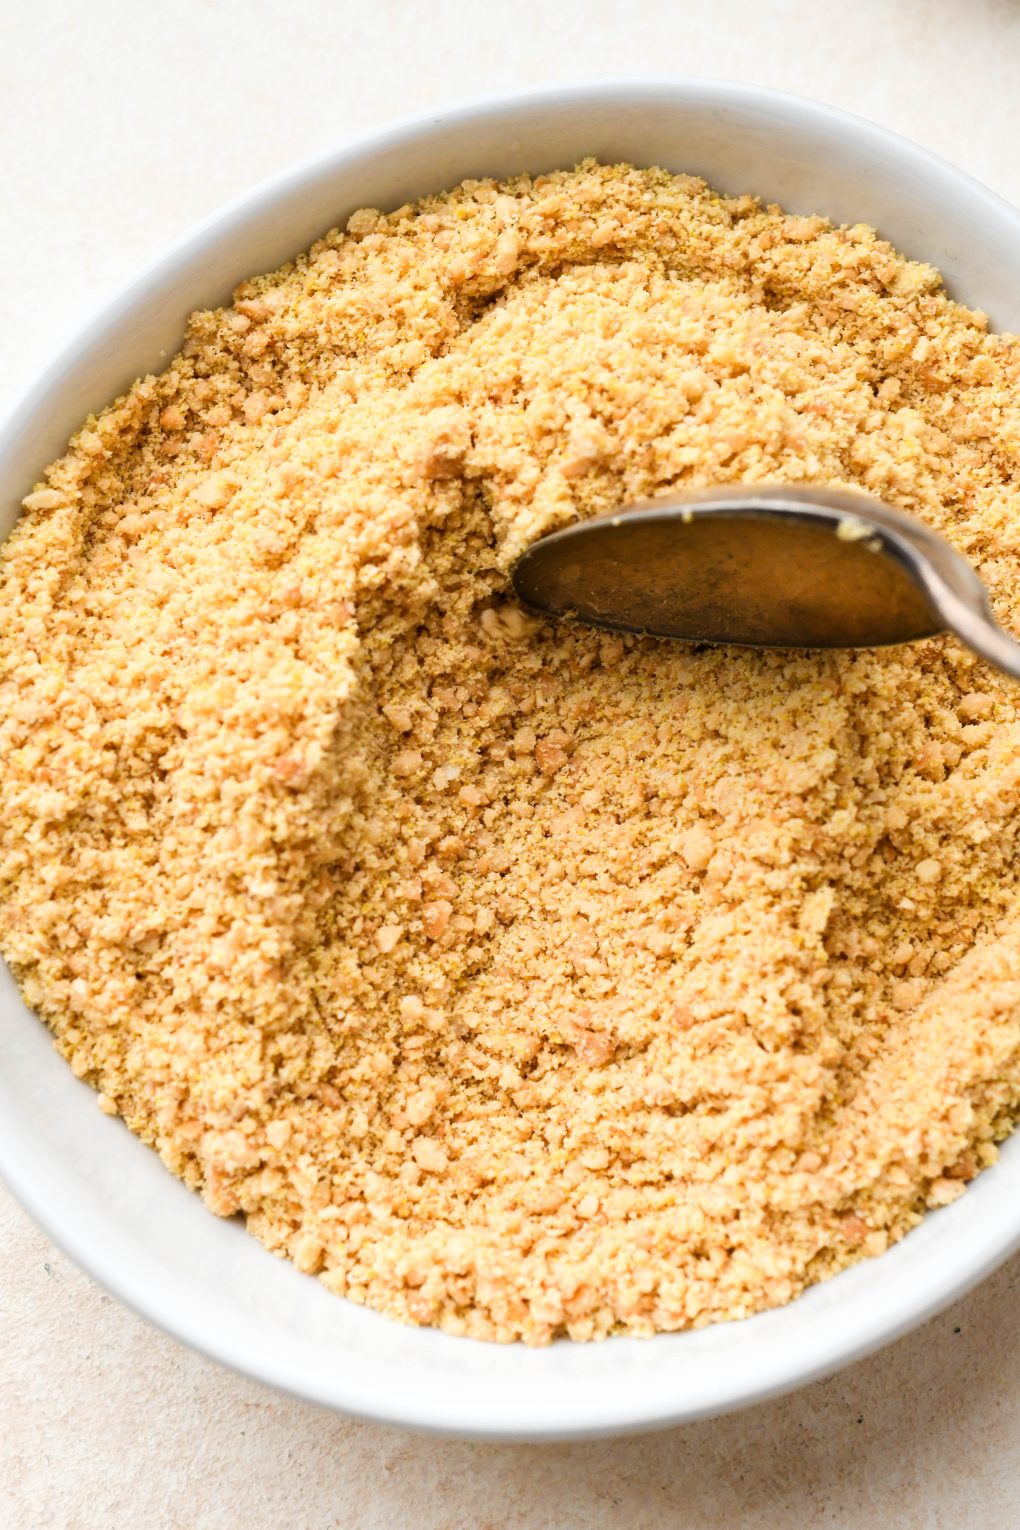 Vegan parmesan cheese in a small shallow white bowl with a spoon dragging through it to show the texture, on a light cream colored background.